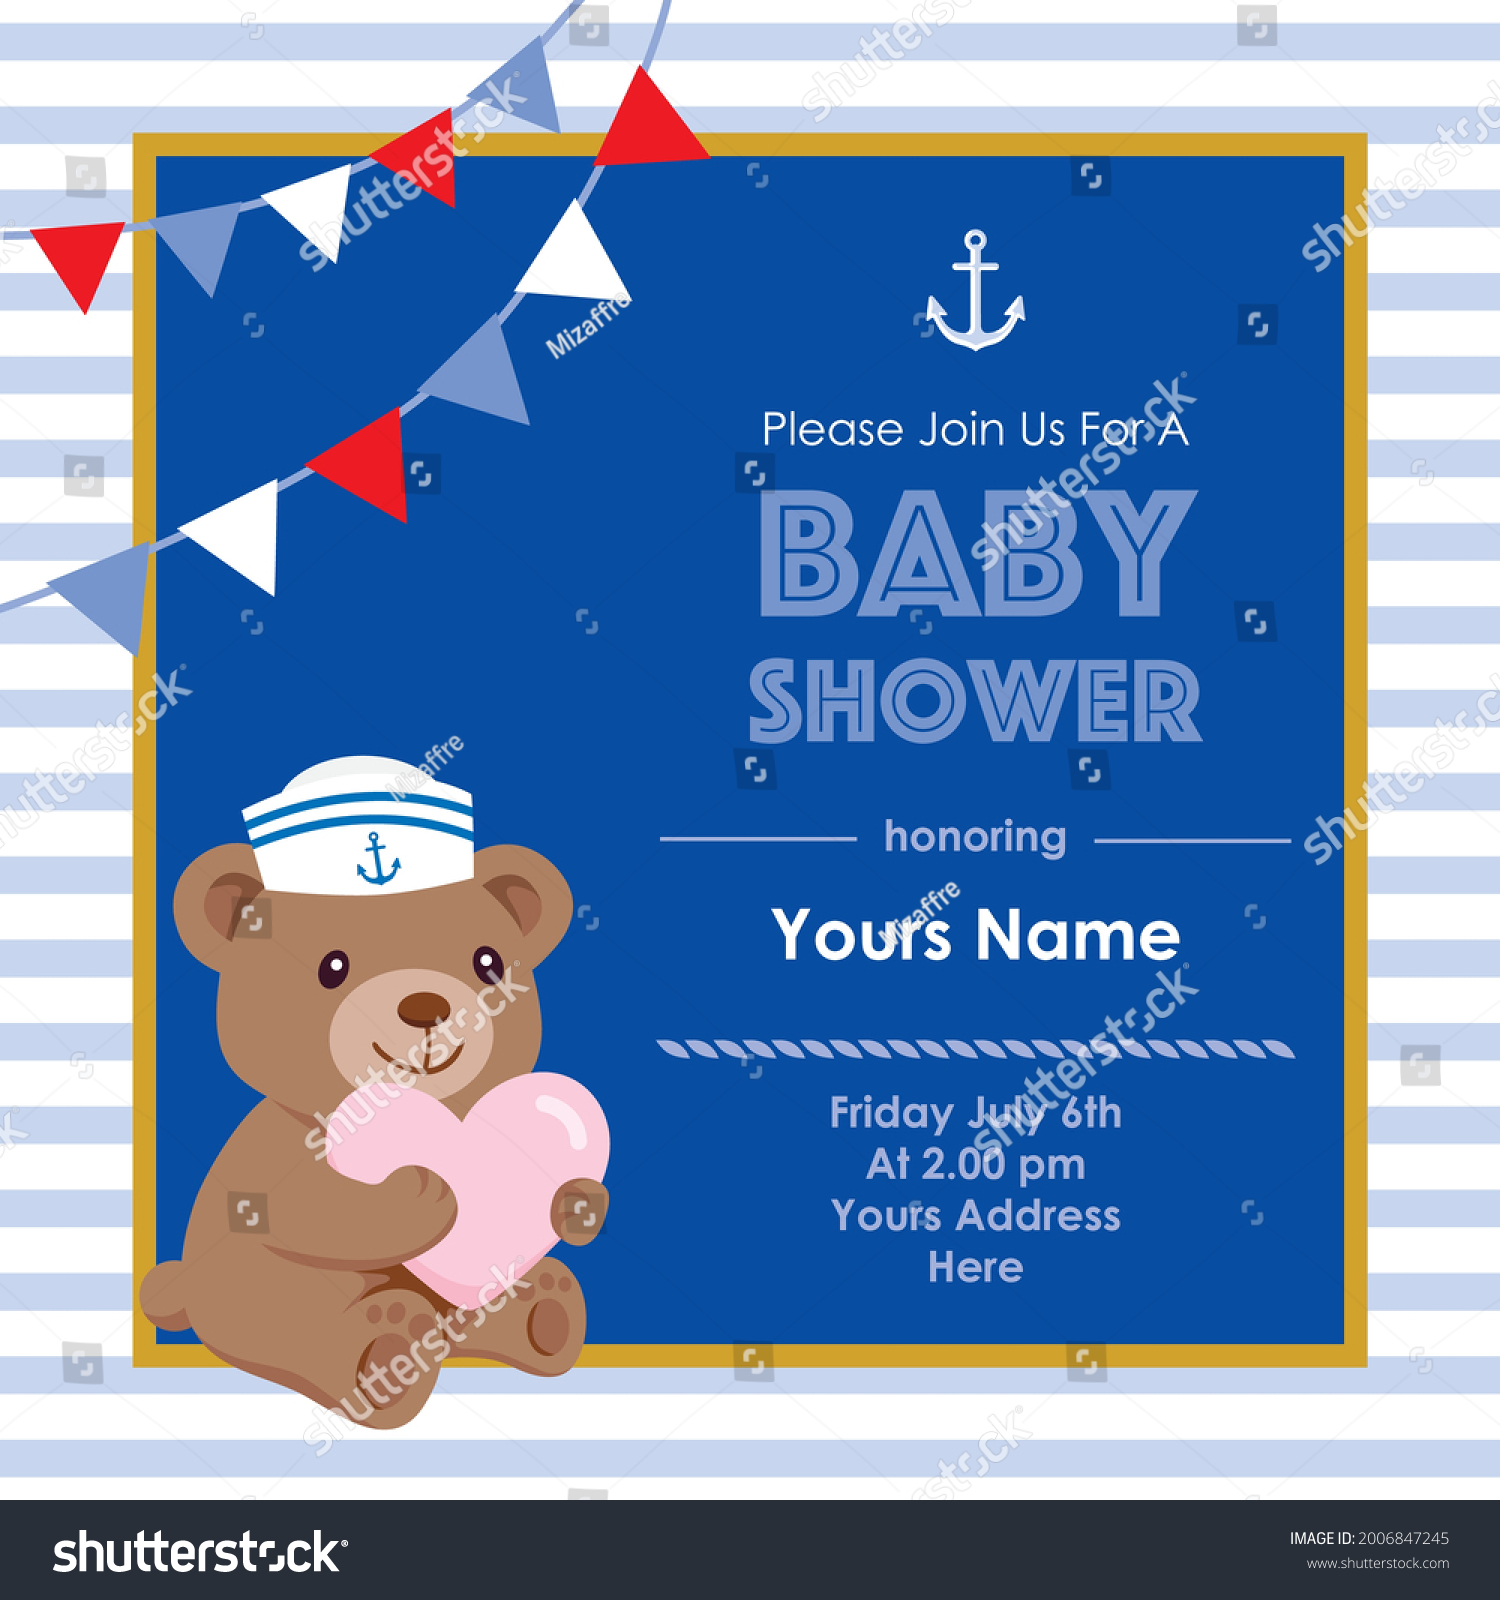 baby-shower-invitation-card-template-sailor-royalty-free-stock